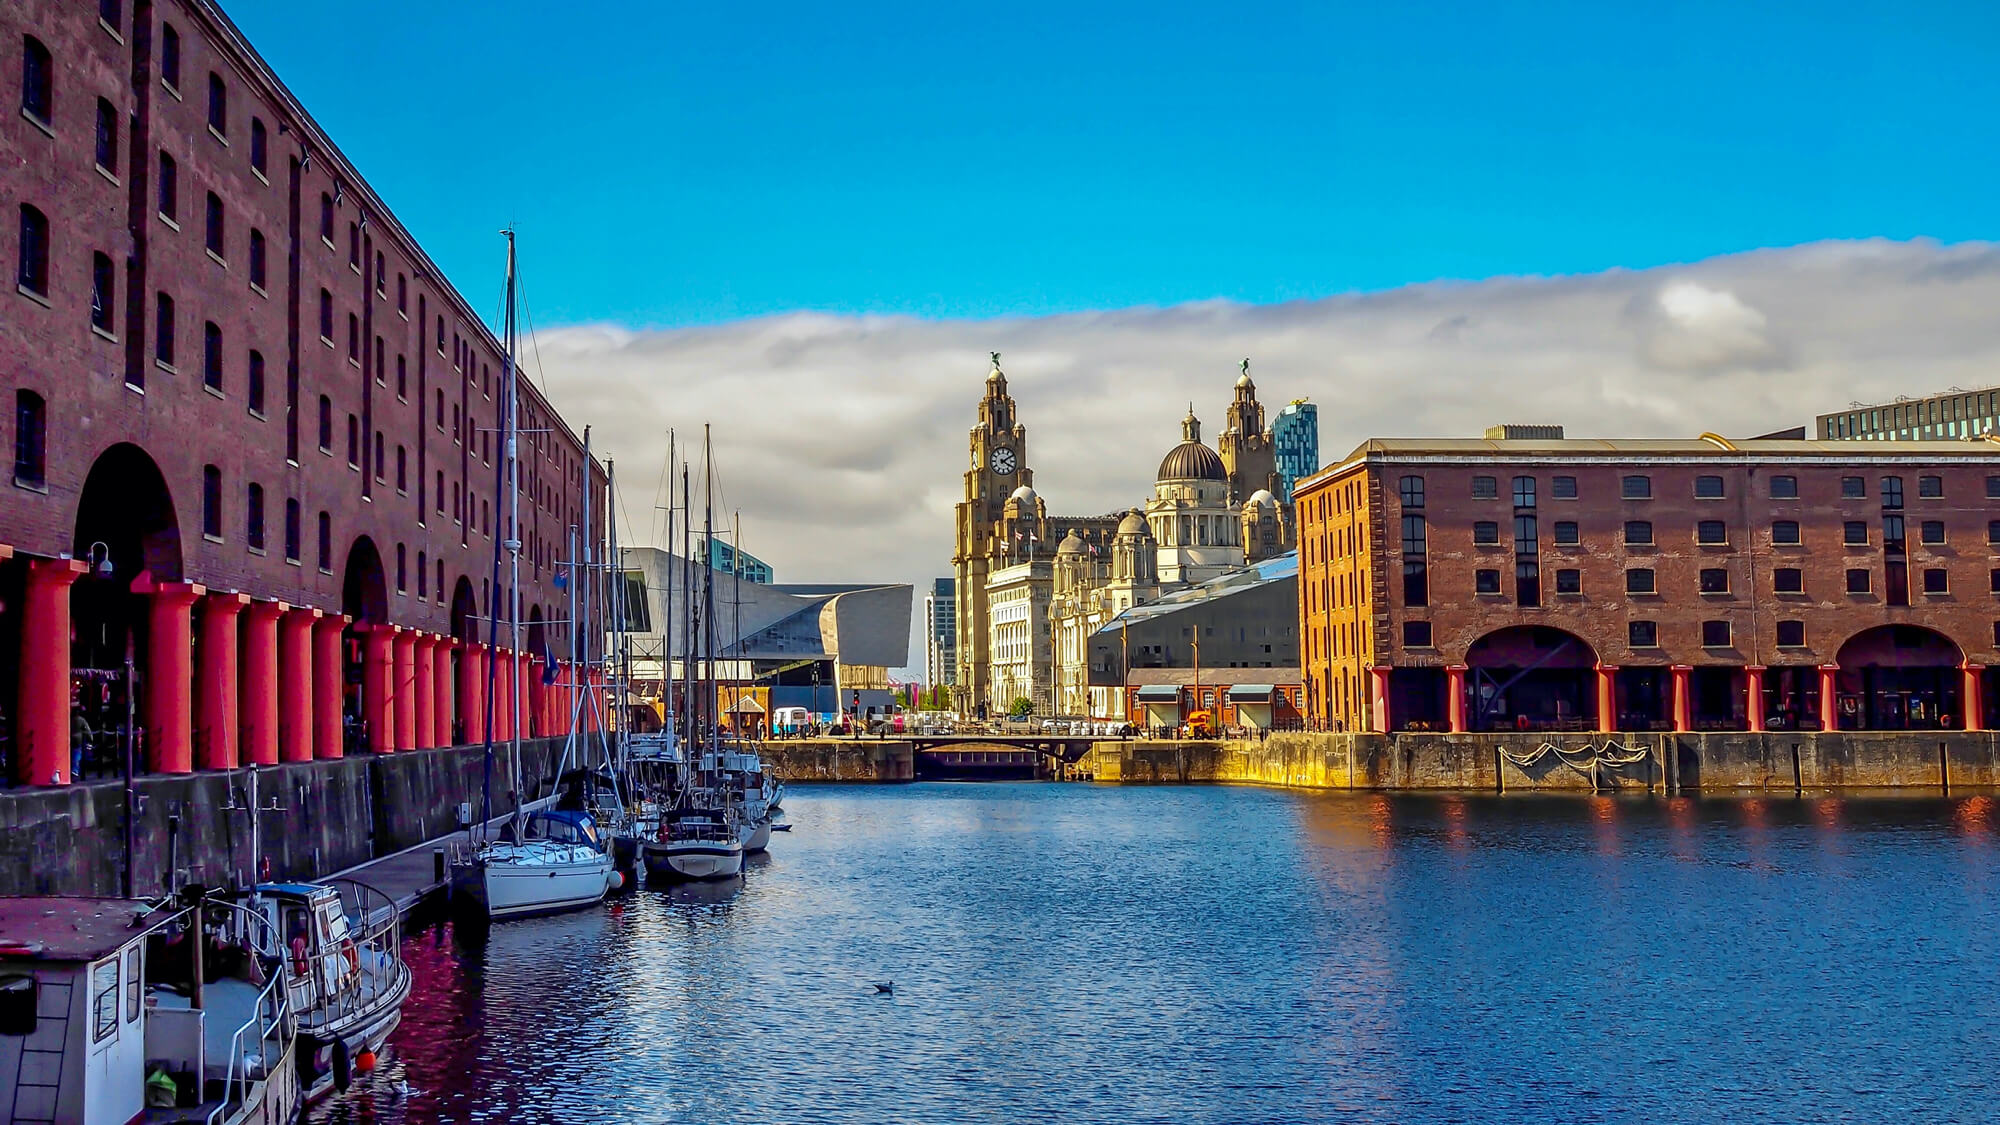 The revitalised Liverpool Docks, a place of unique beauty offering fun activities with historic architecture in the backdrop